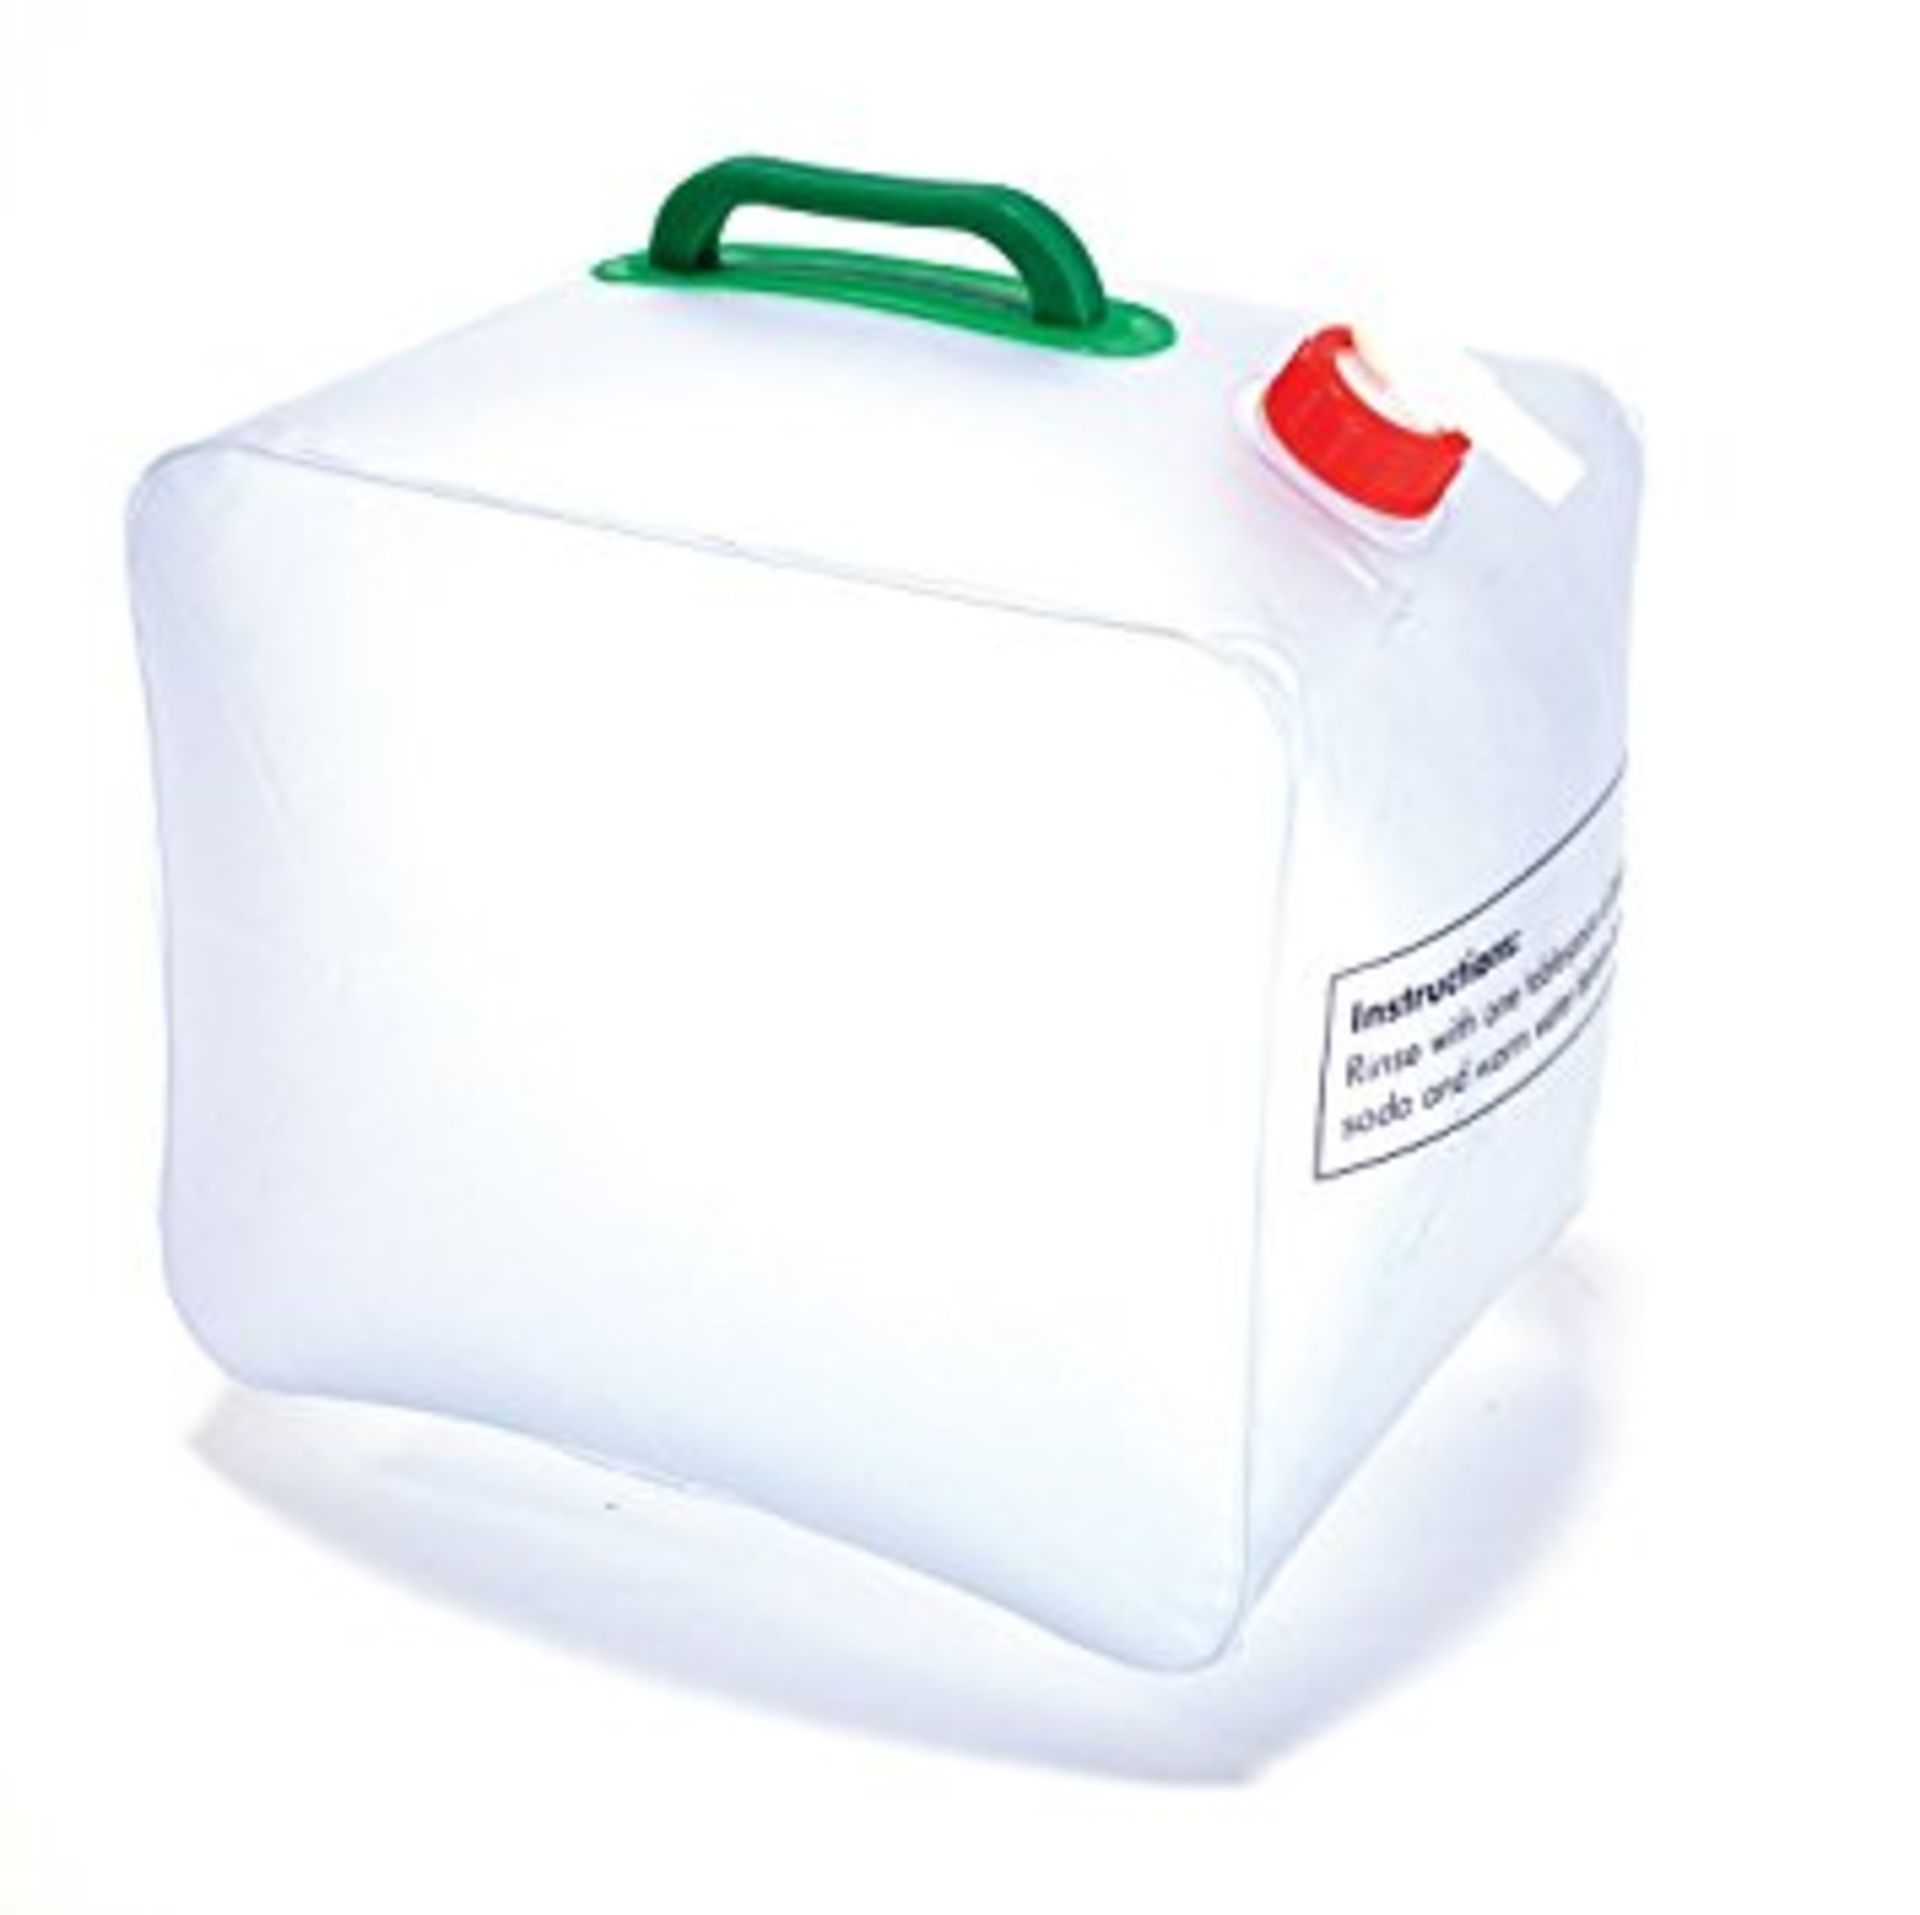 V Brand New Compact Fifteen Litre Water Carrier X 2 YOUR BID PRICE TO BE MULTIPLIED BY TWO